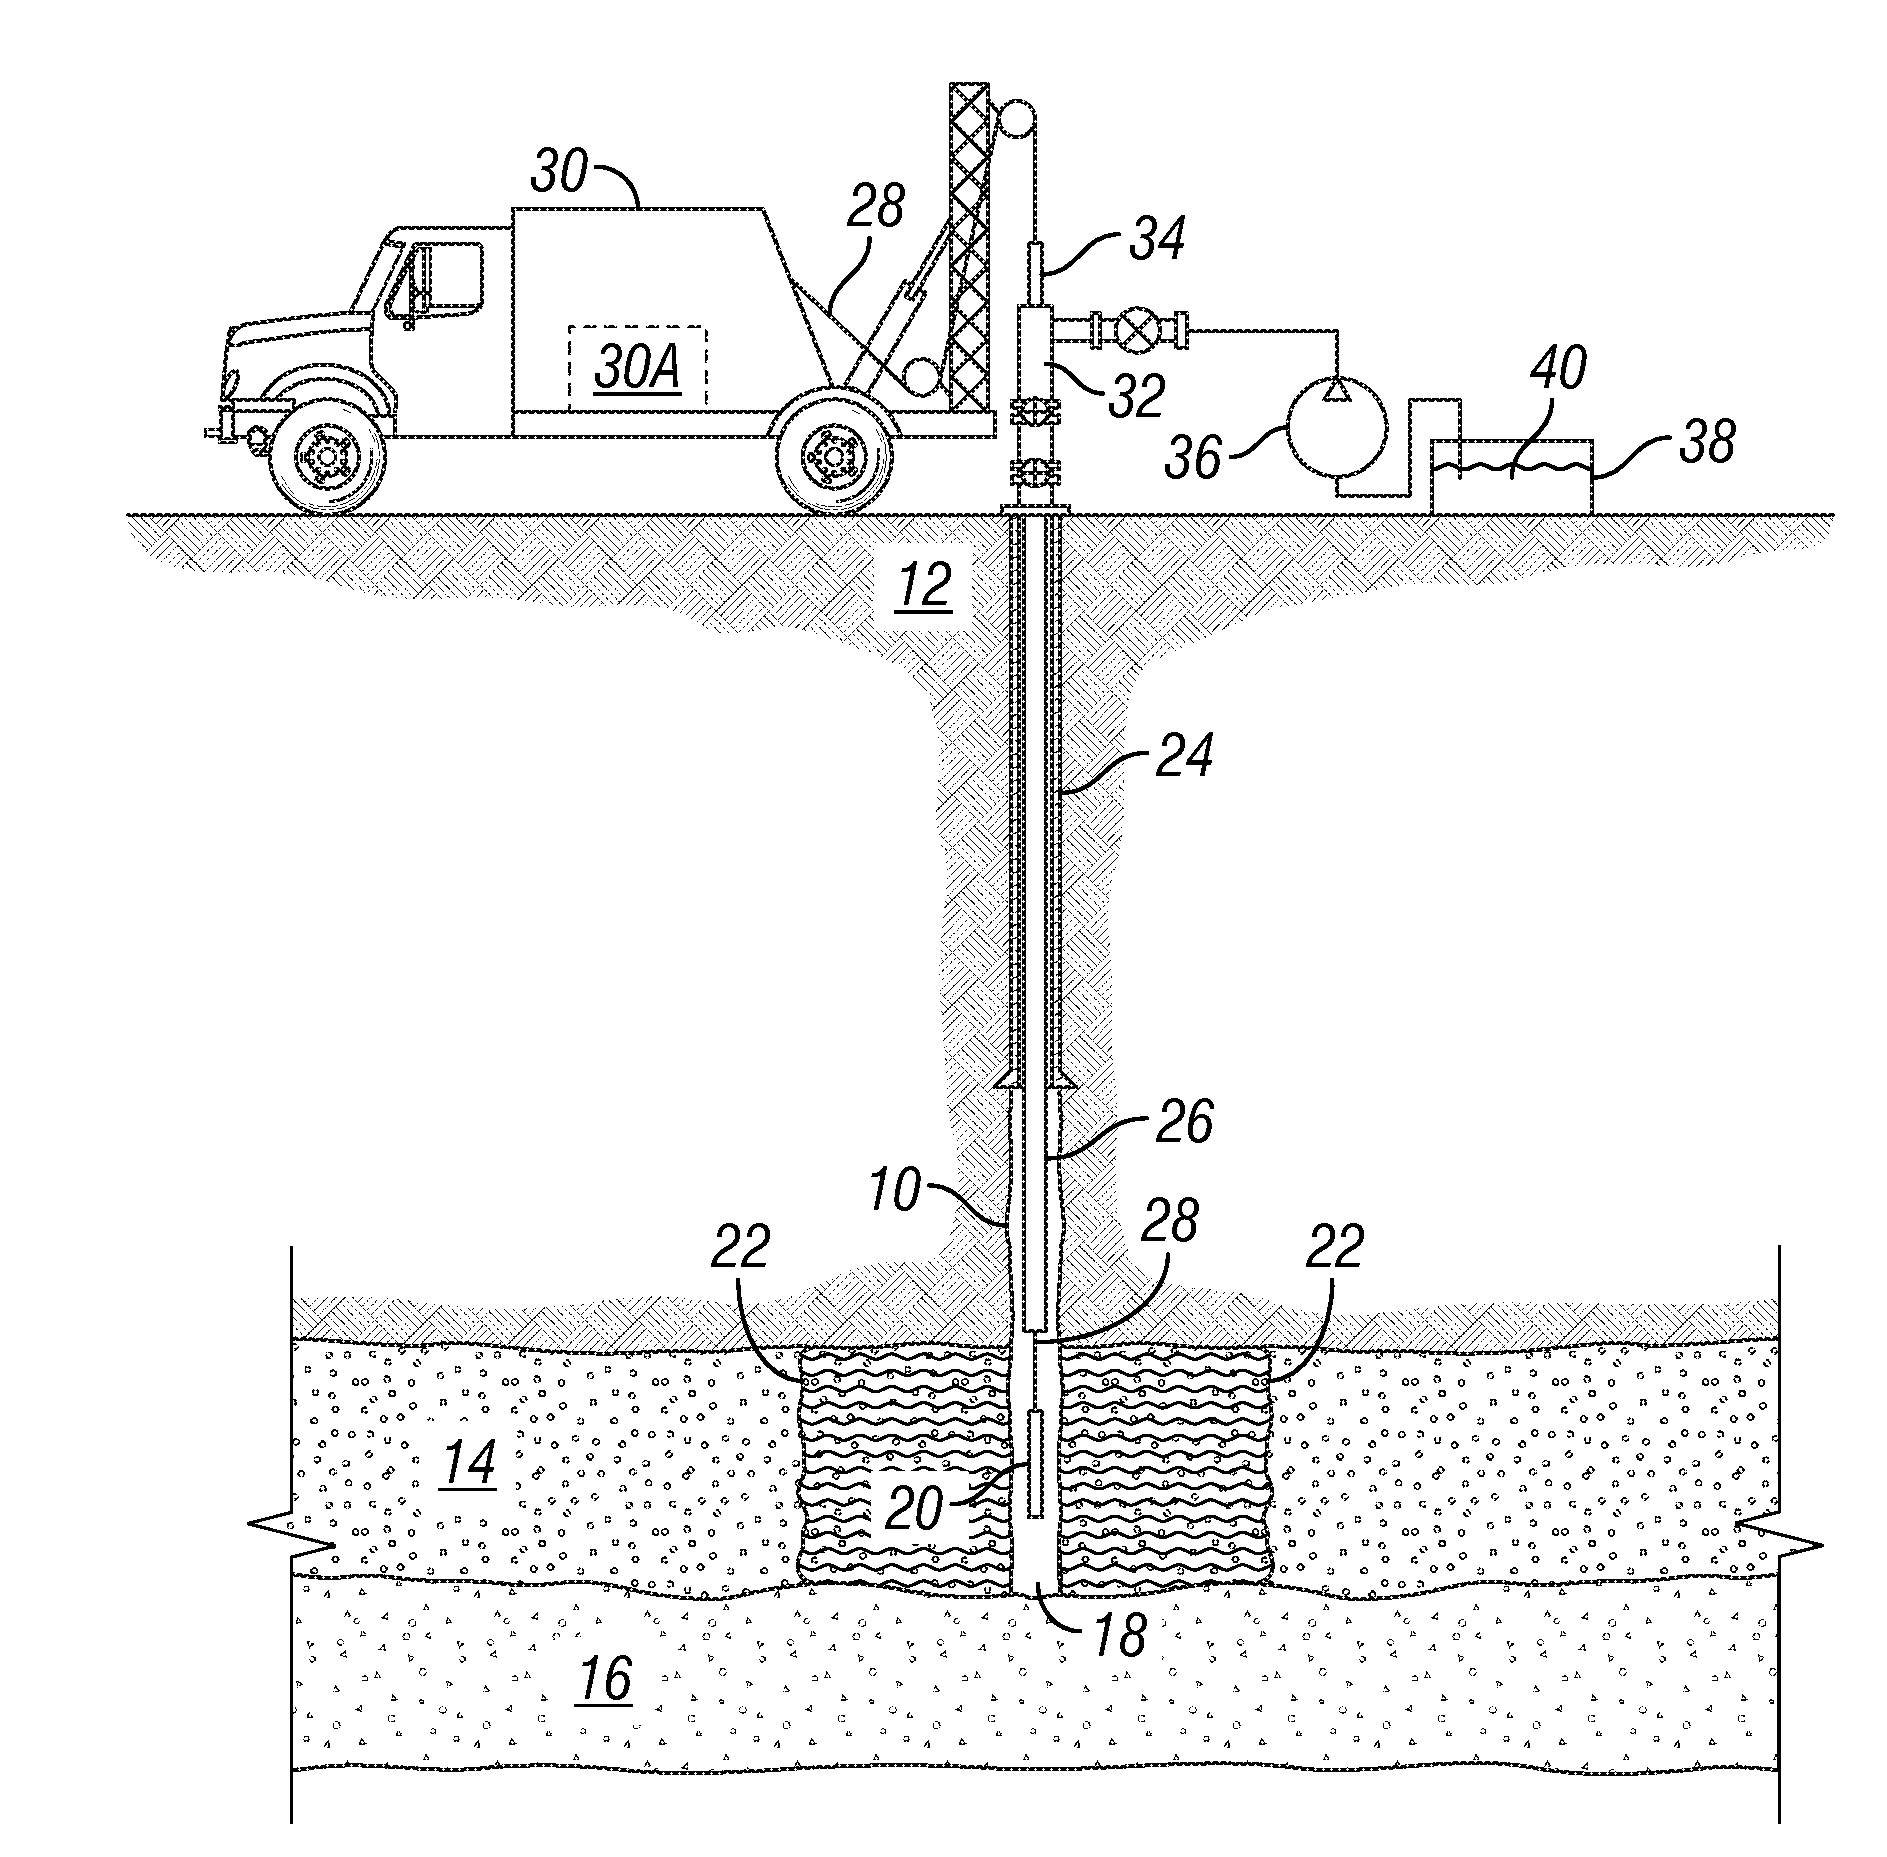 Method for determining spatial distribution of fluid injected into subsurface rock formations